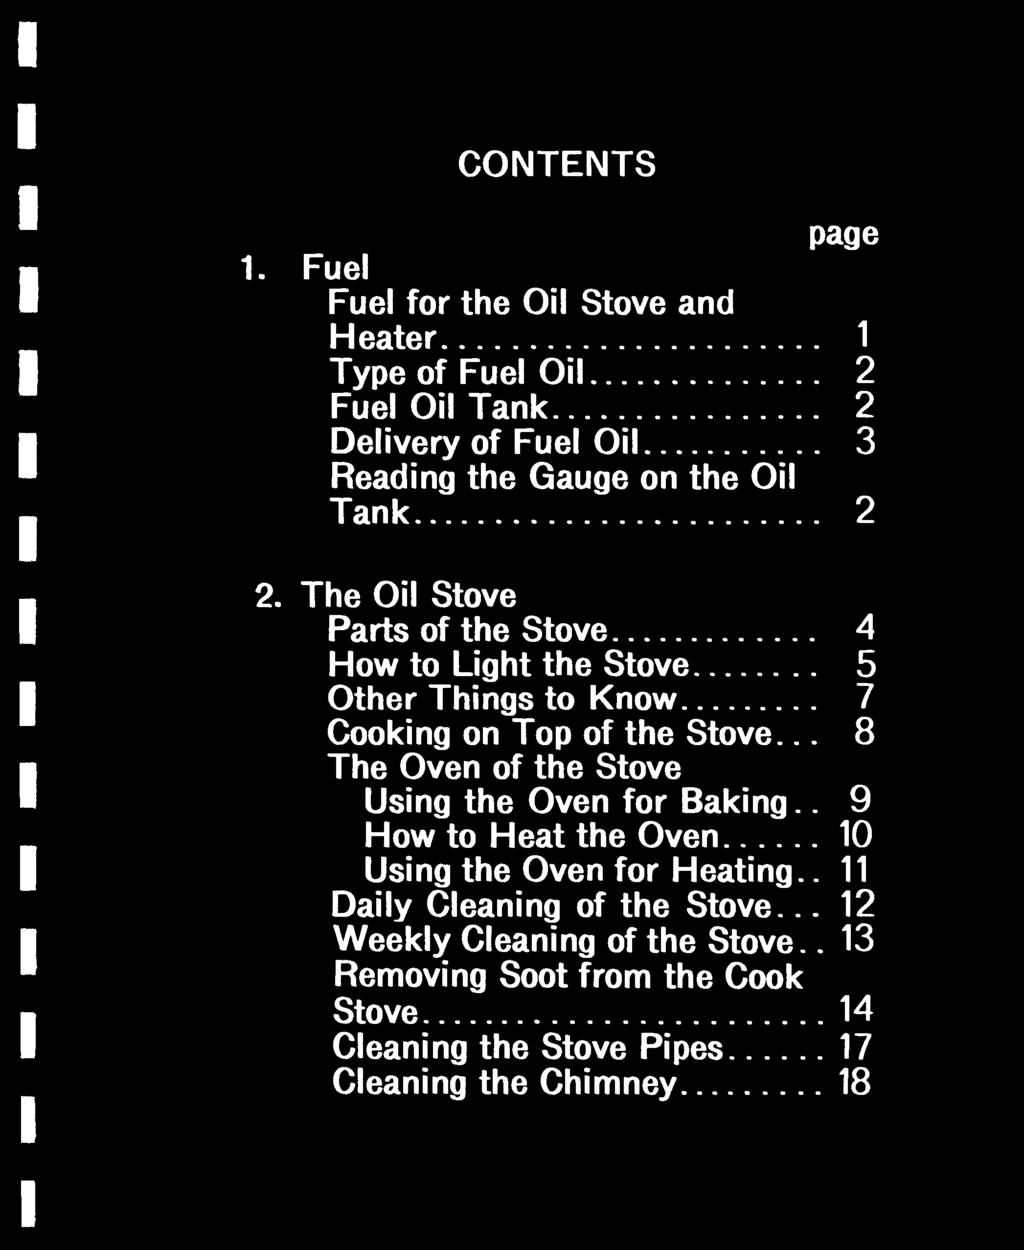 CONTENTS page 1. Fuel Fuel for the Oil Stove and Heater 1 Type of Fuel Oil 2 Fuel Oil Tank 2 Delivery of Fuel Oil 3 Reading the Gauge on the Oil Tank 2 2.